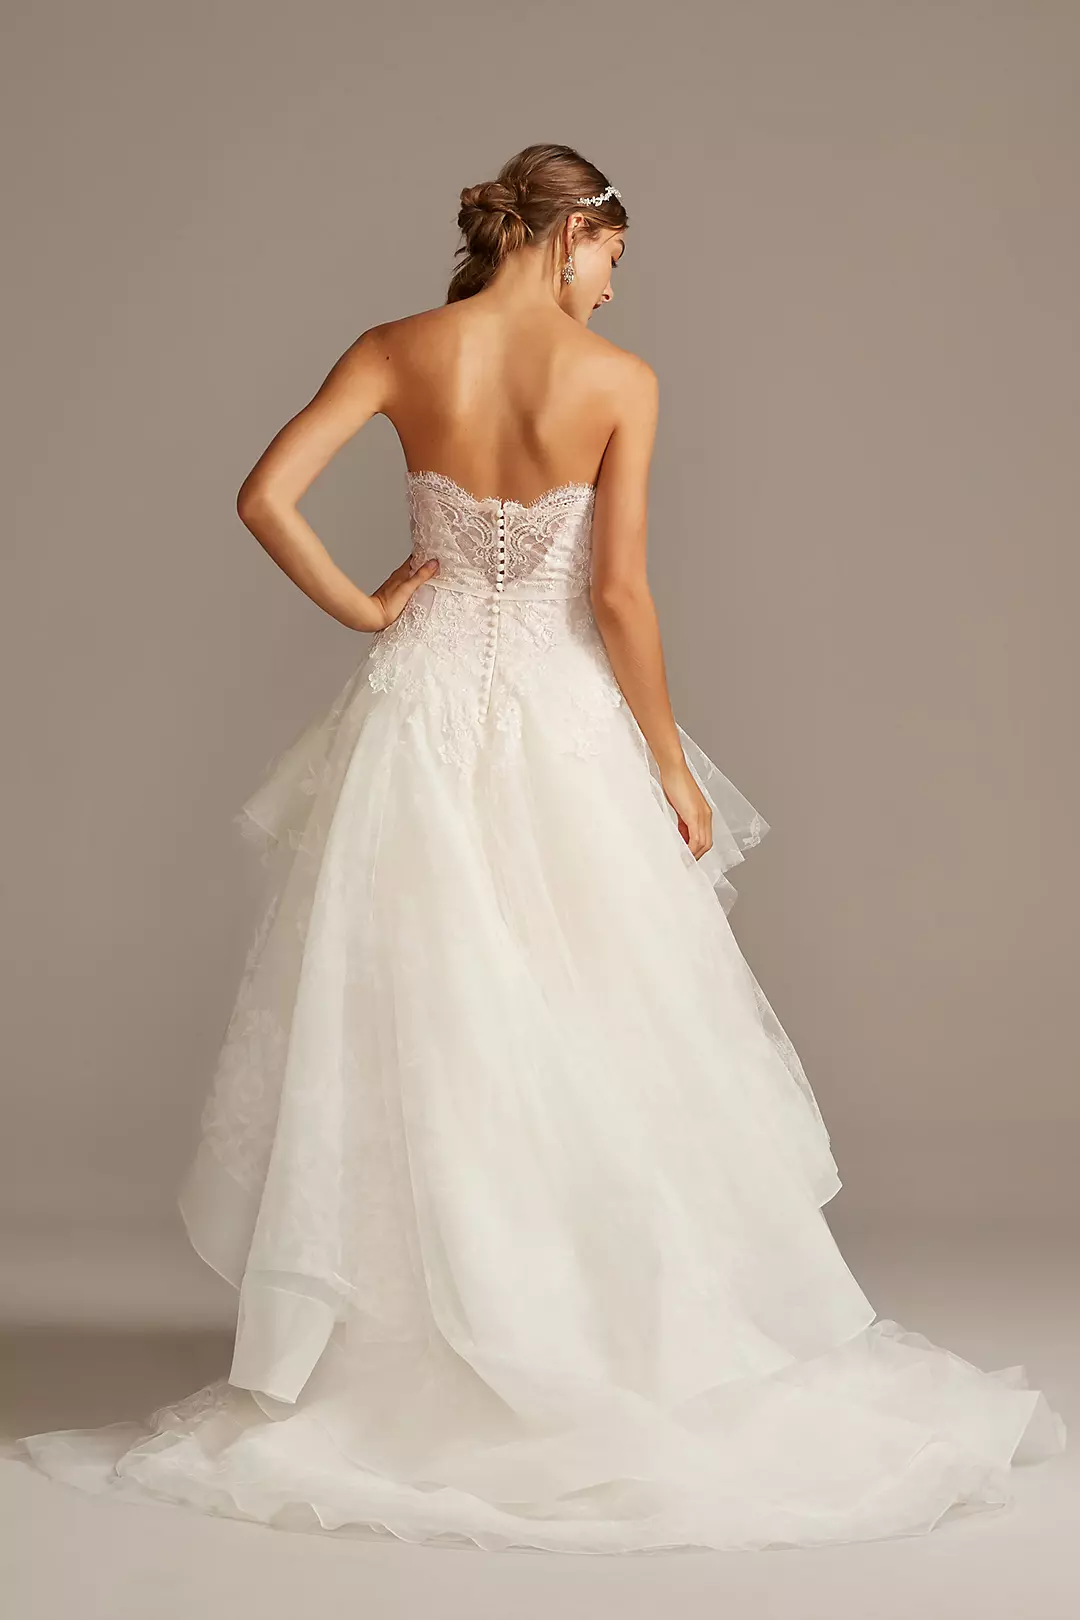 Printed Tulle Wedding Dress with Tiered Skirt Image 2